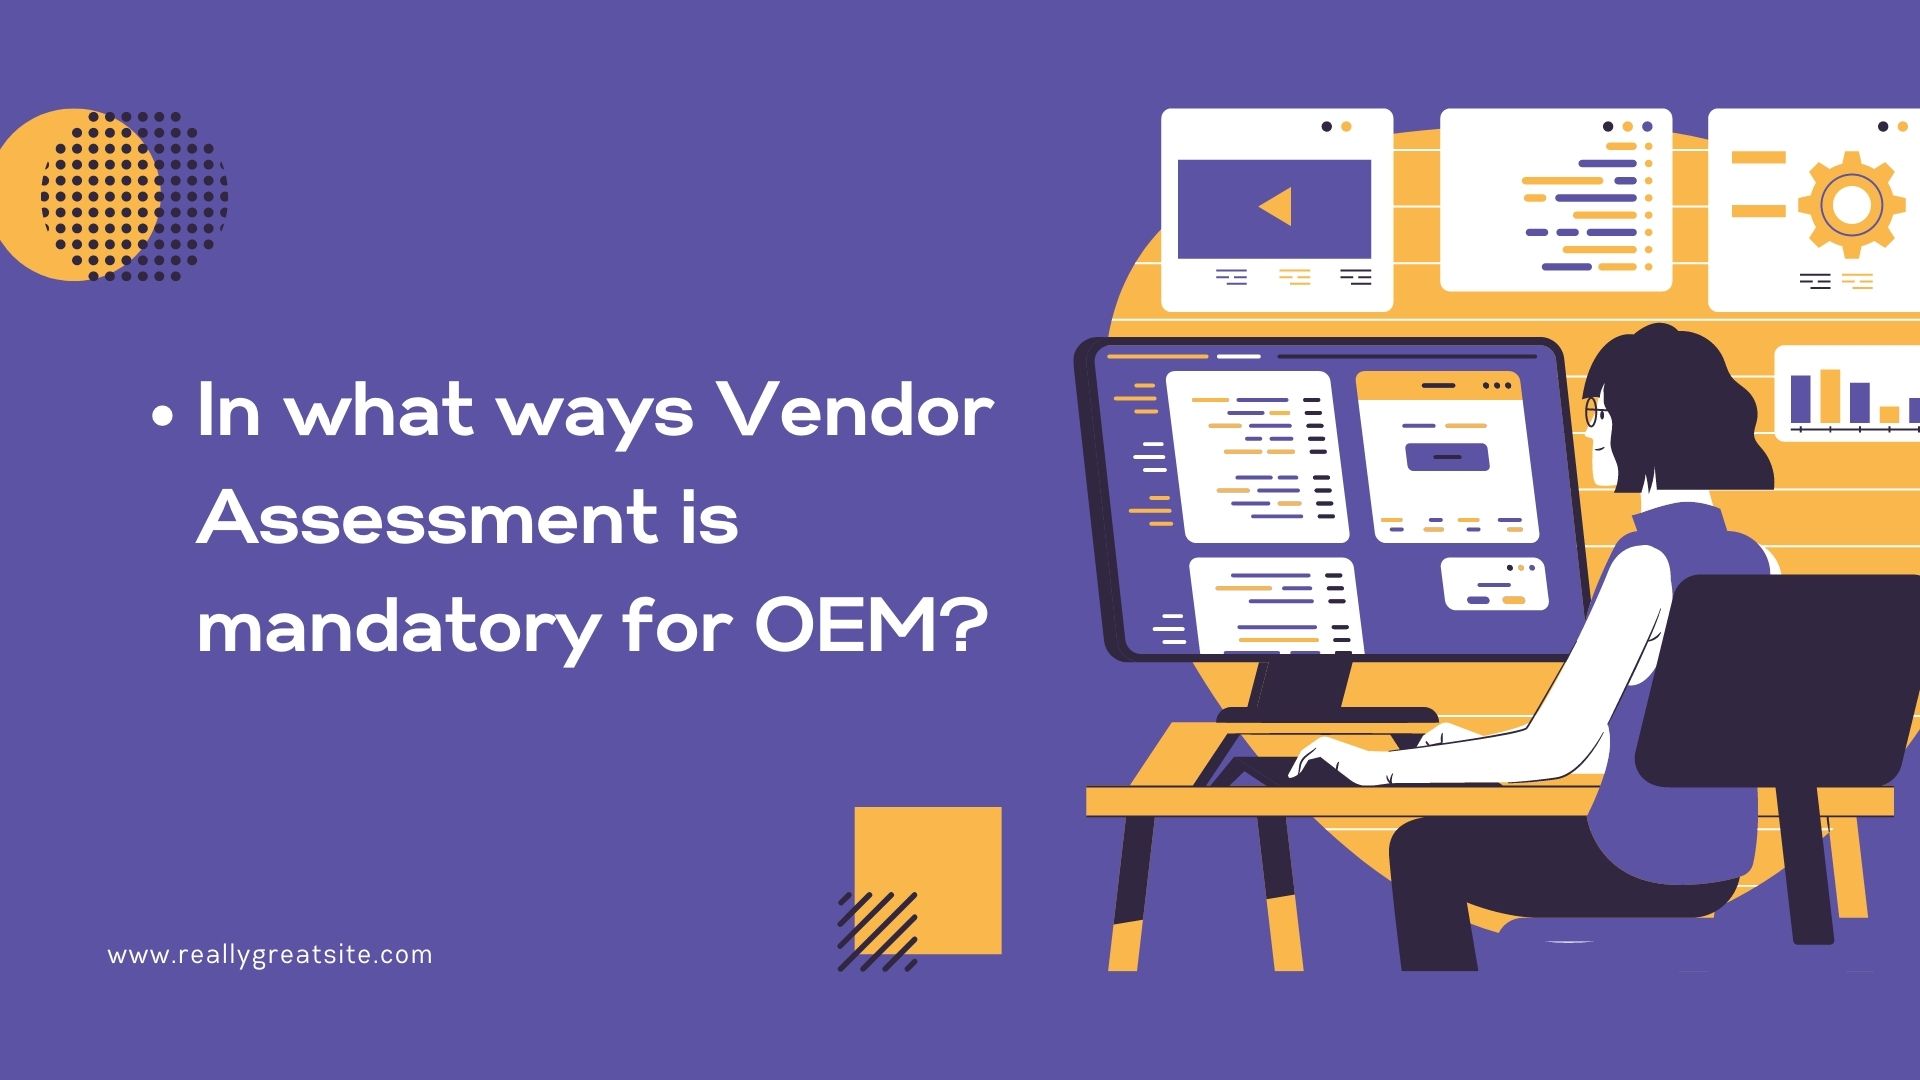 In what ways Vendor Assessment is mandatory for OEM